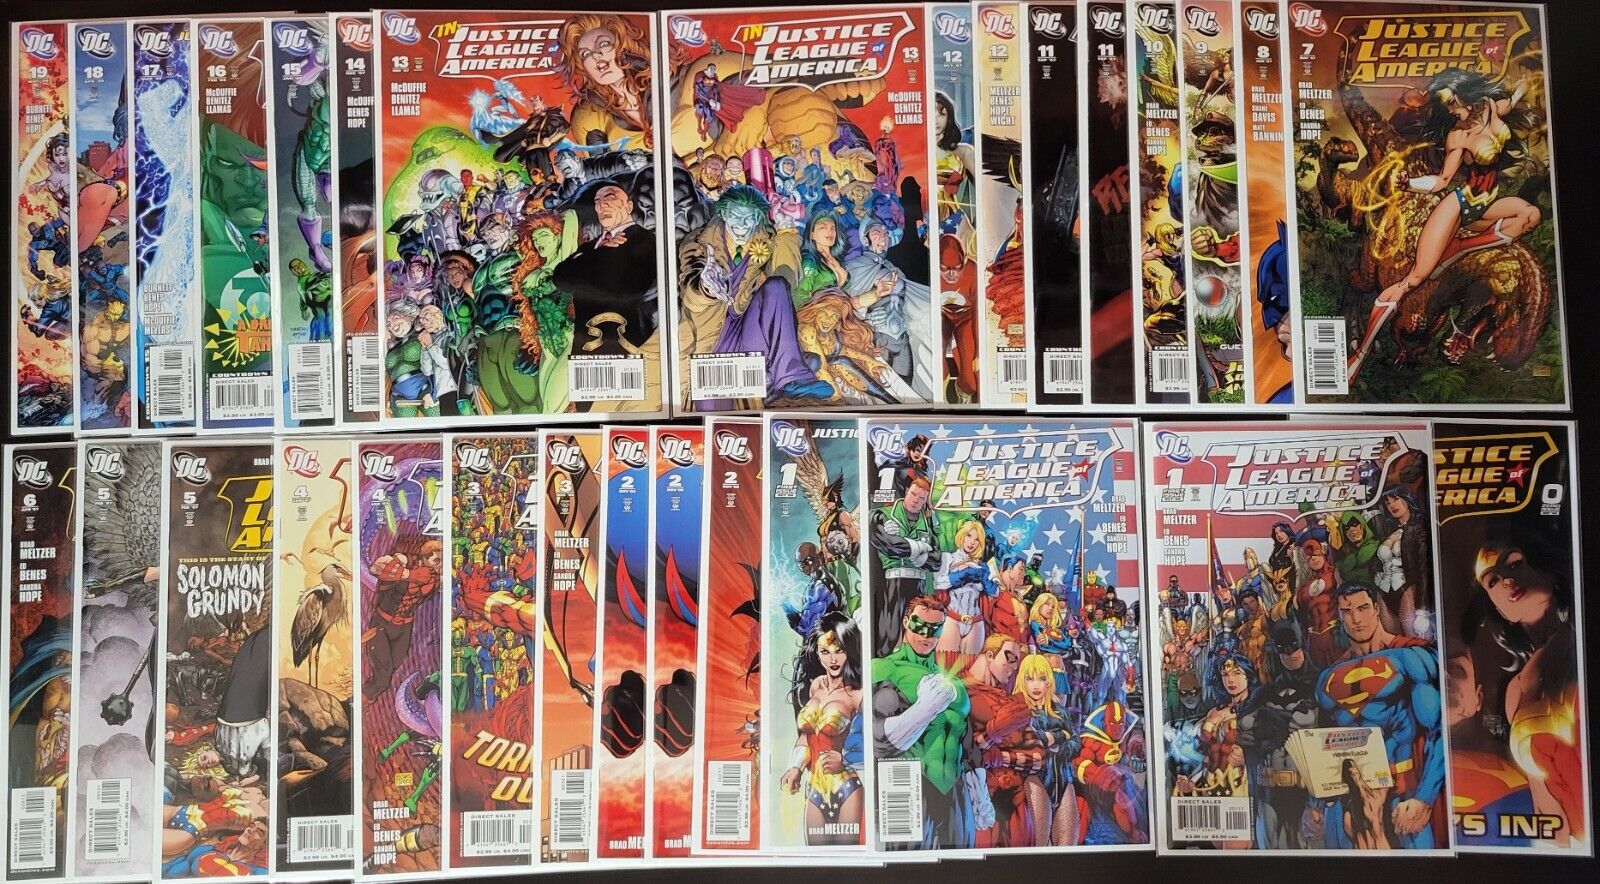 Justice League of America V2 #0 - #19 Tons of Variants DC comics 2006 Lot of 30.